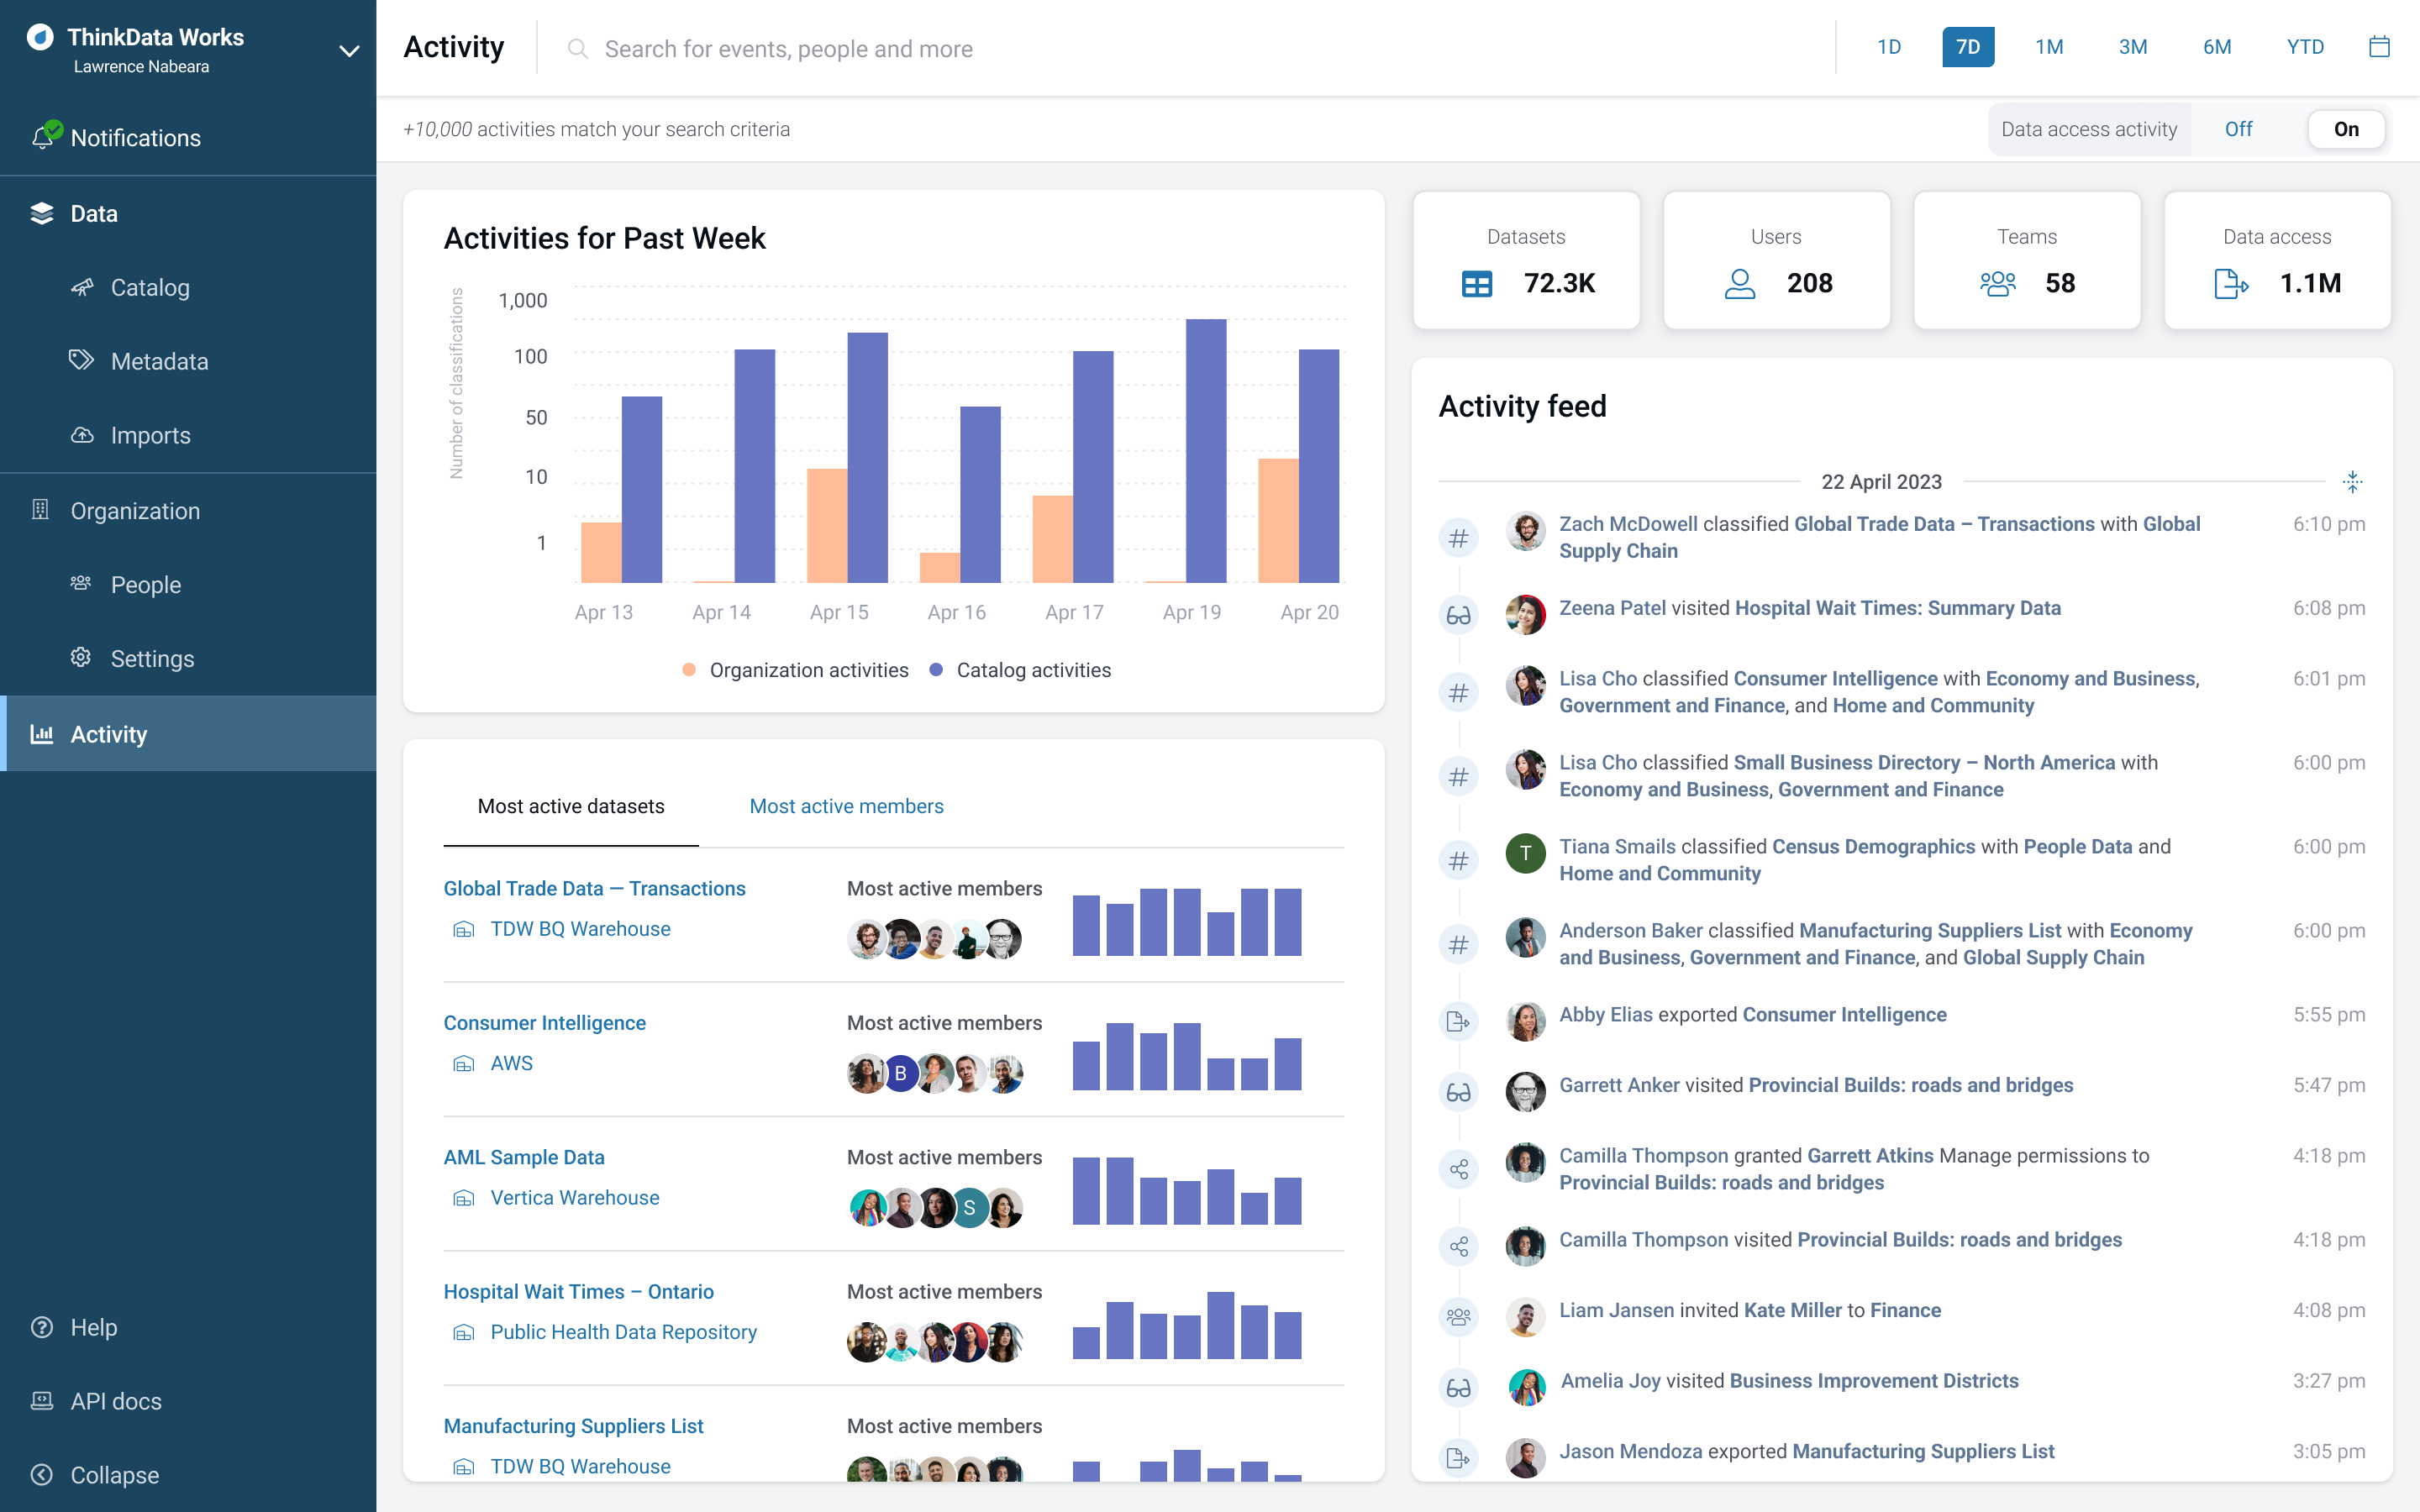 With the activity dashboard, get deep usage insights into the data that your organization has access to, the data that is useful, and the people that are interacting with it.